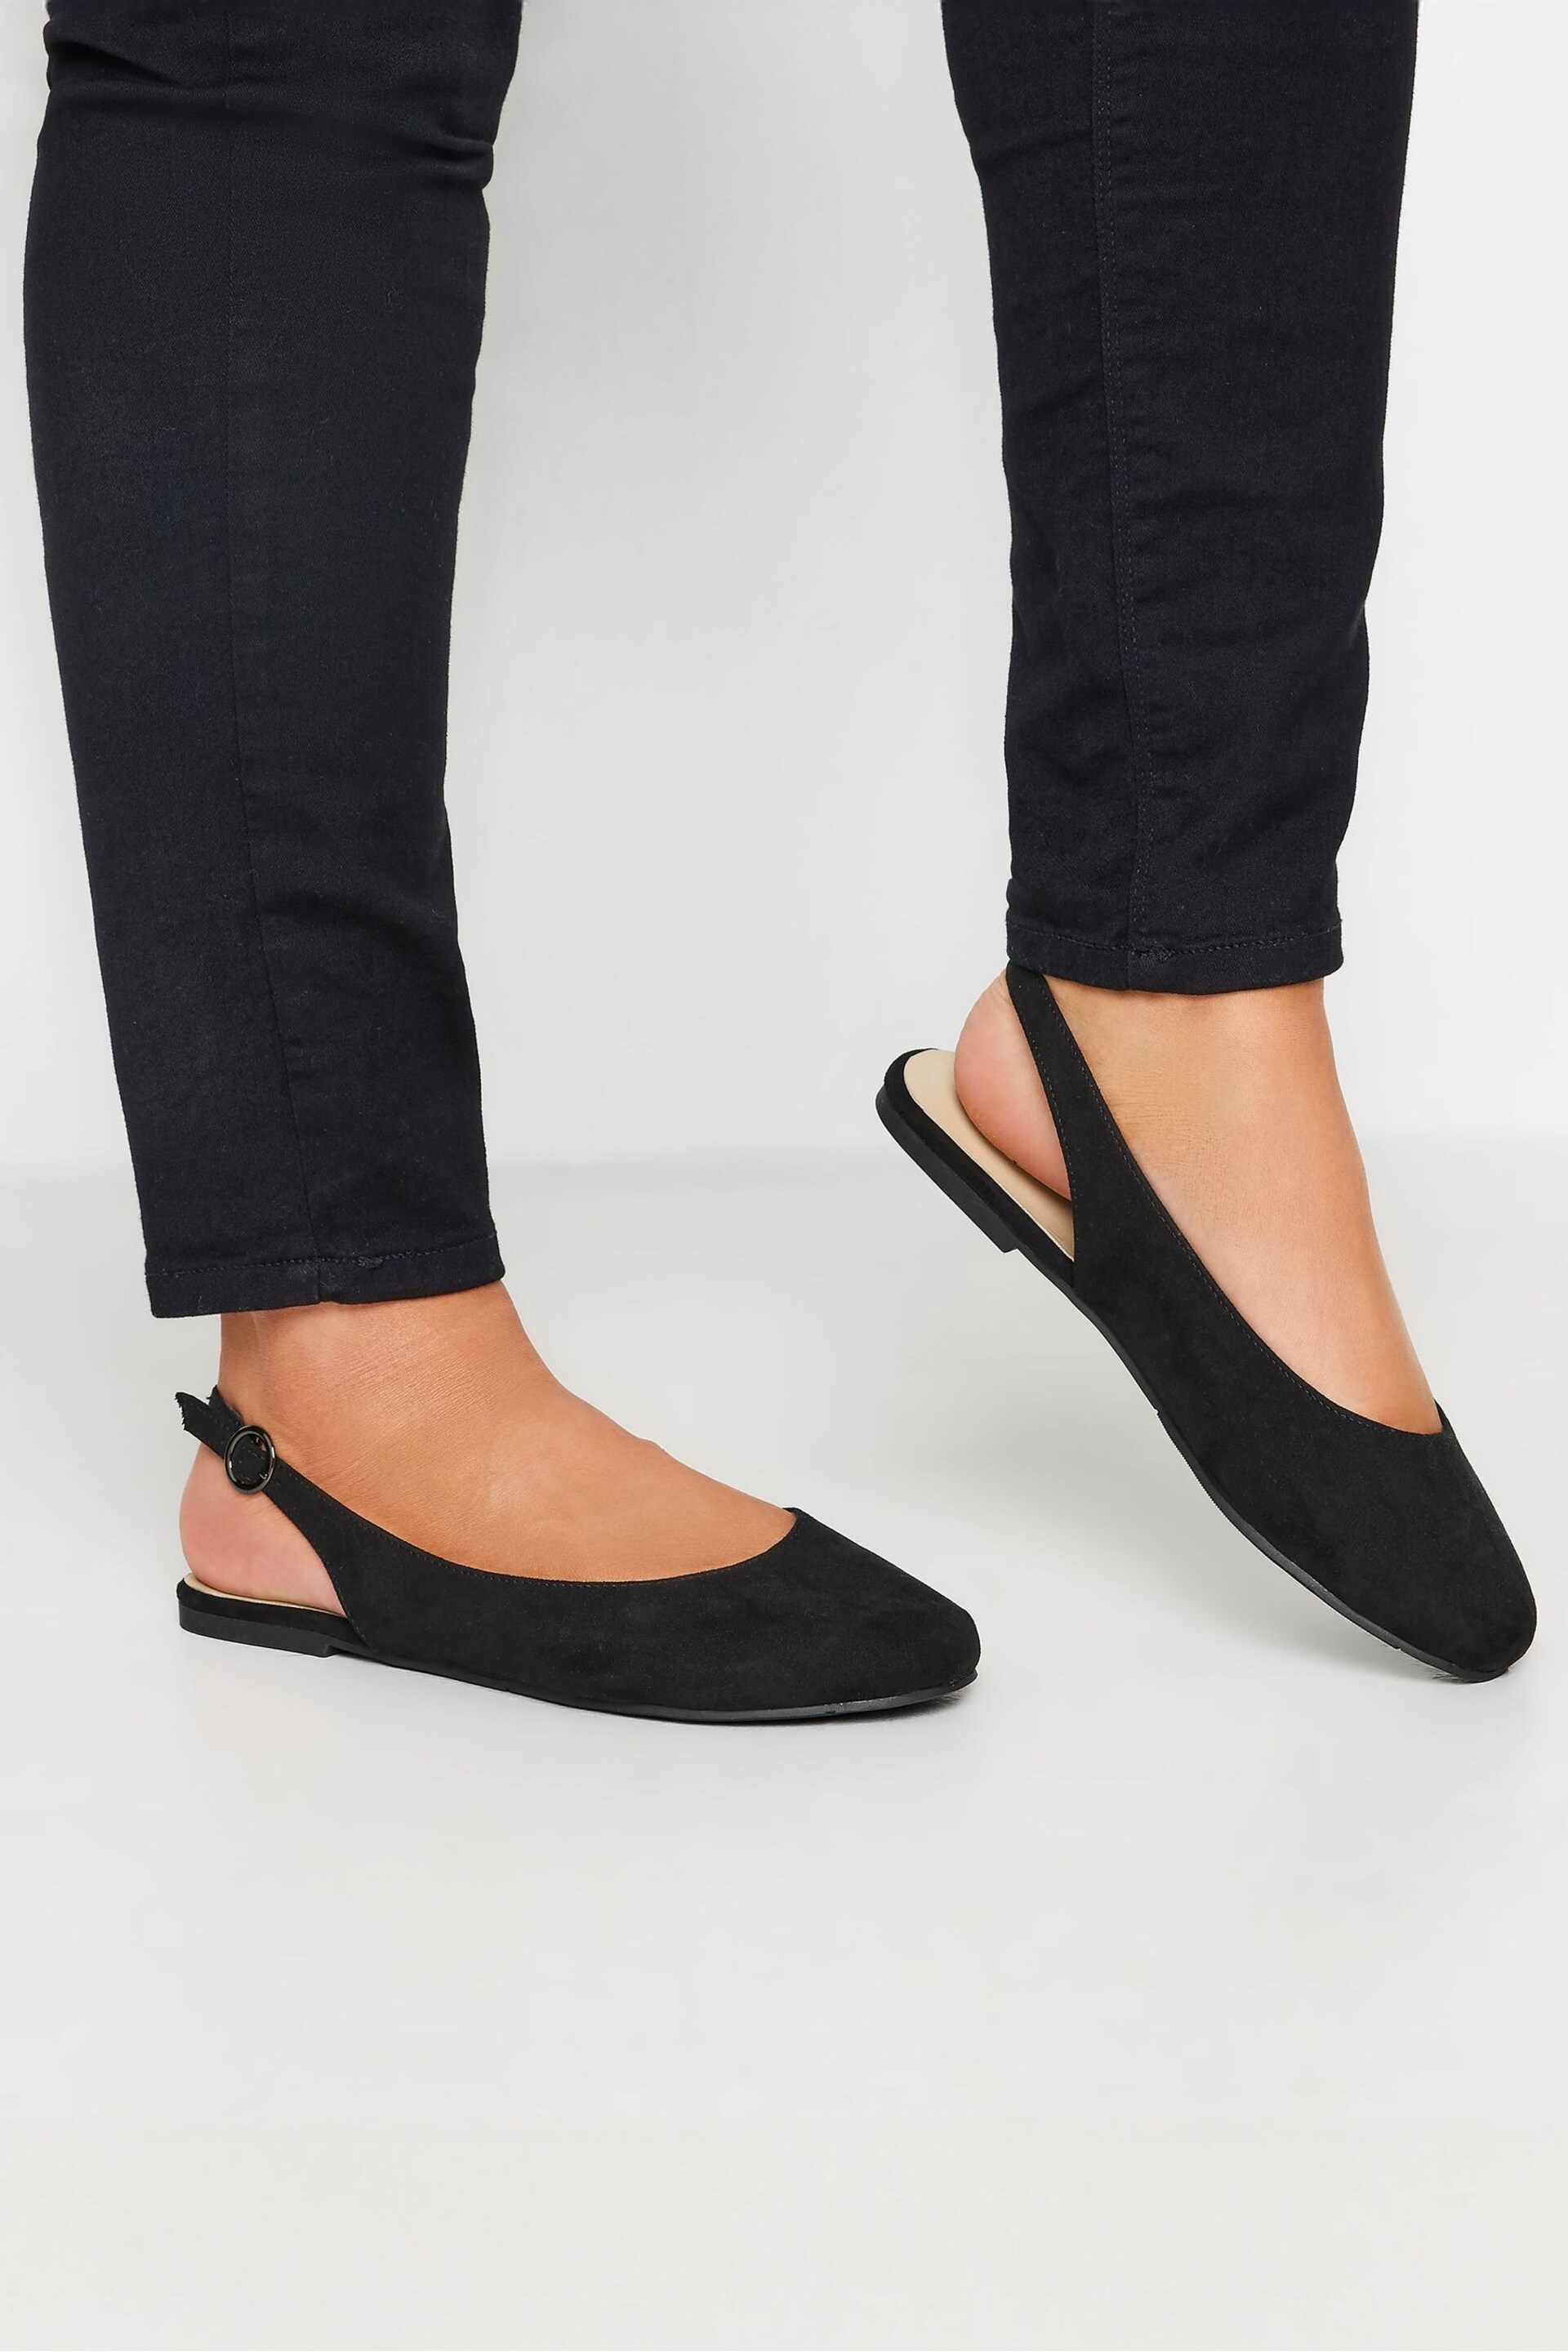 Yours Curve Black Faux Suede Slingback Pumps In Extra Wide EEE Fit - Image 1 of 5